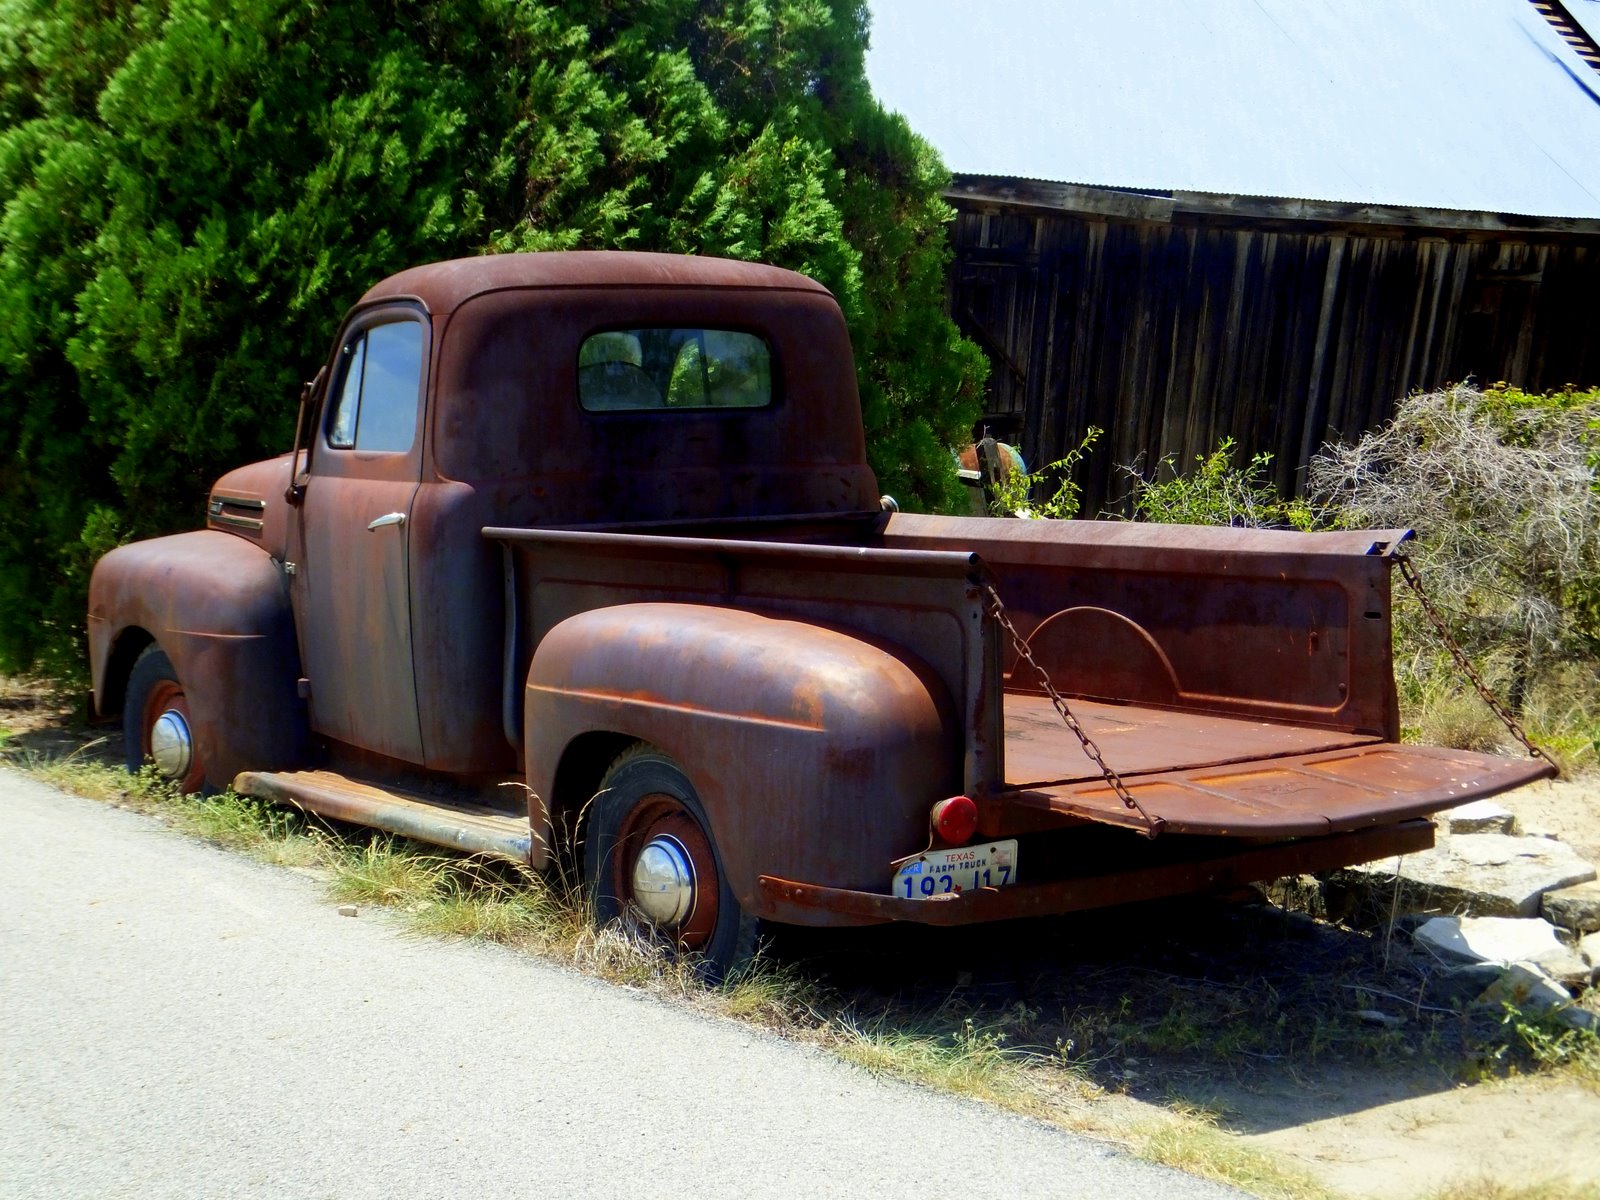 Grit in the Gears: Rusty Old Truck Post No1